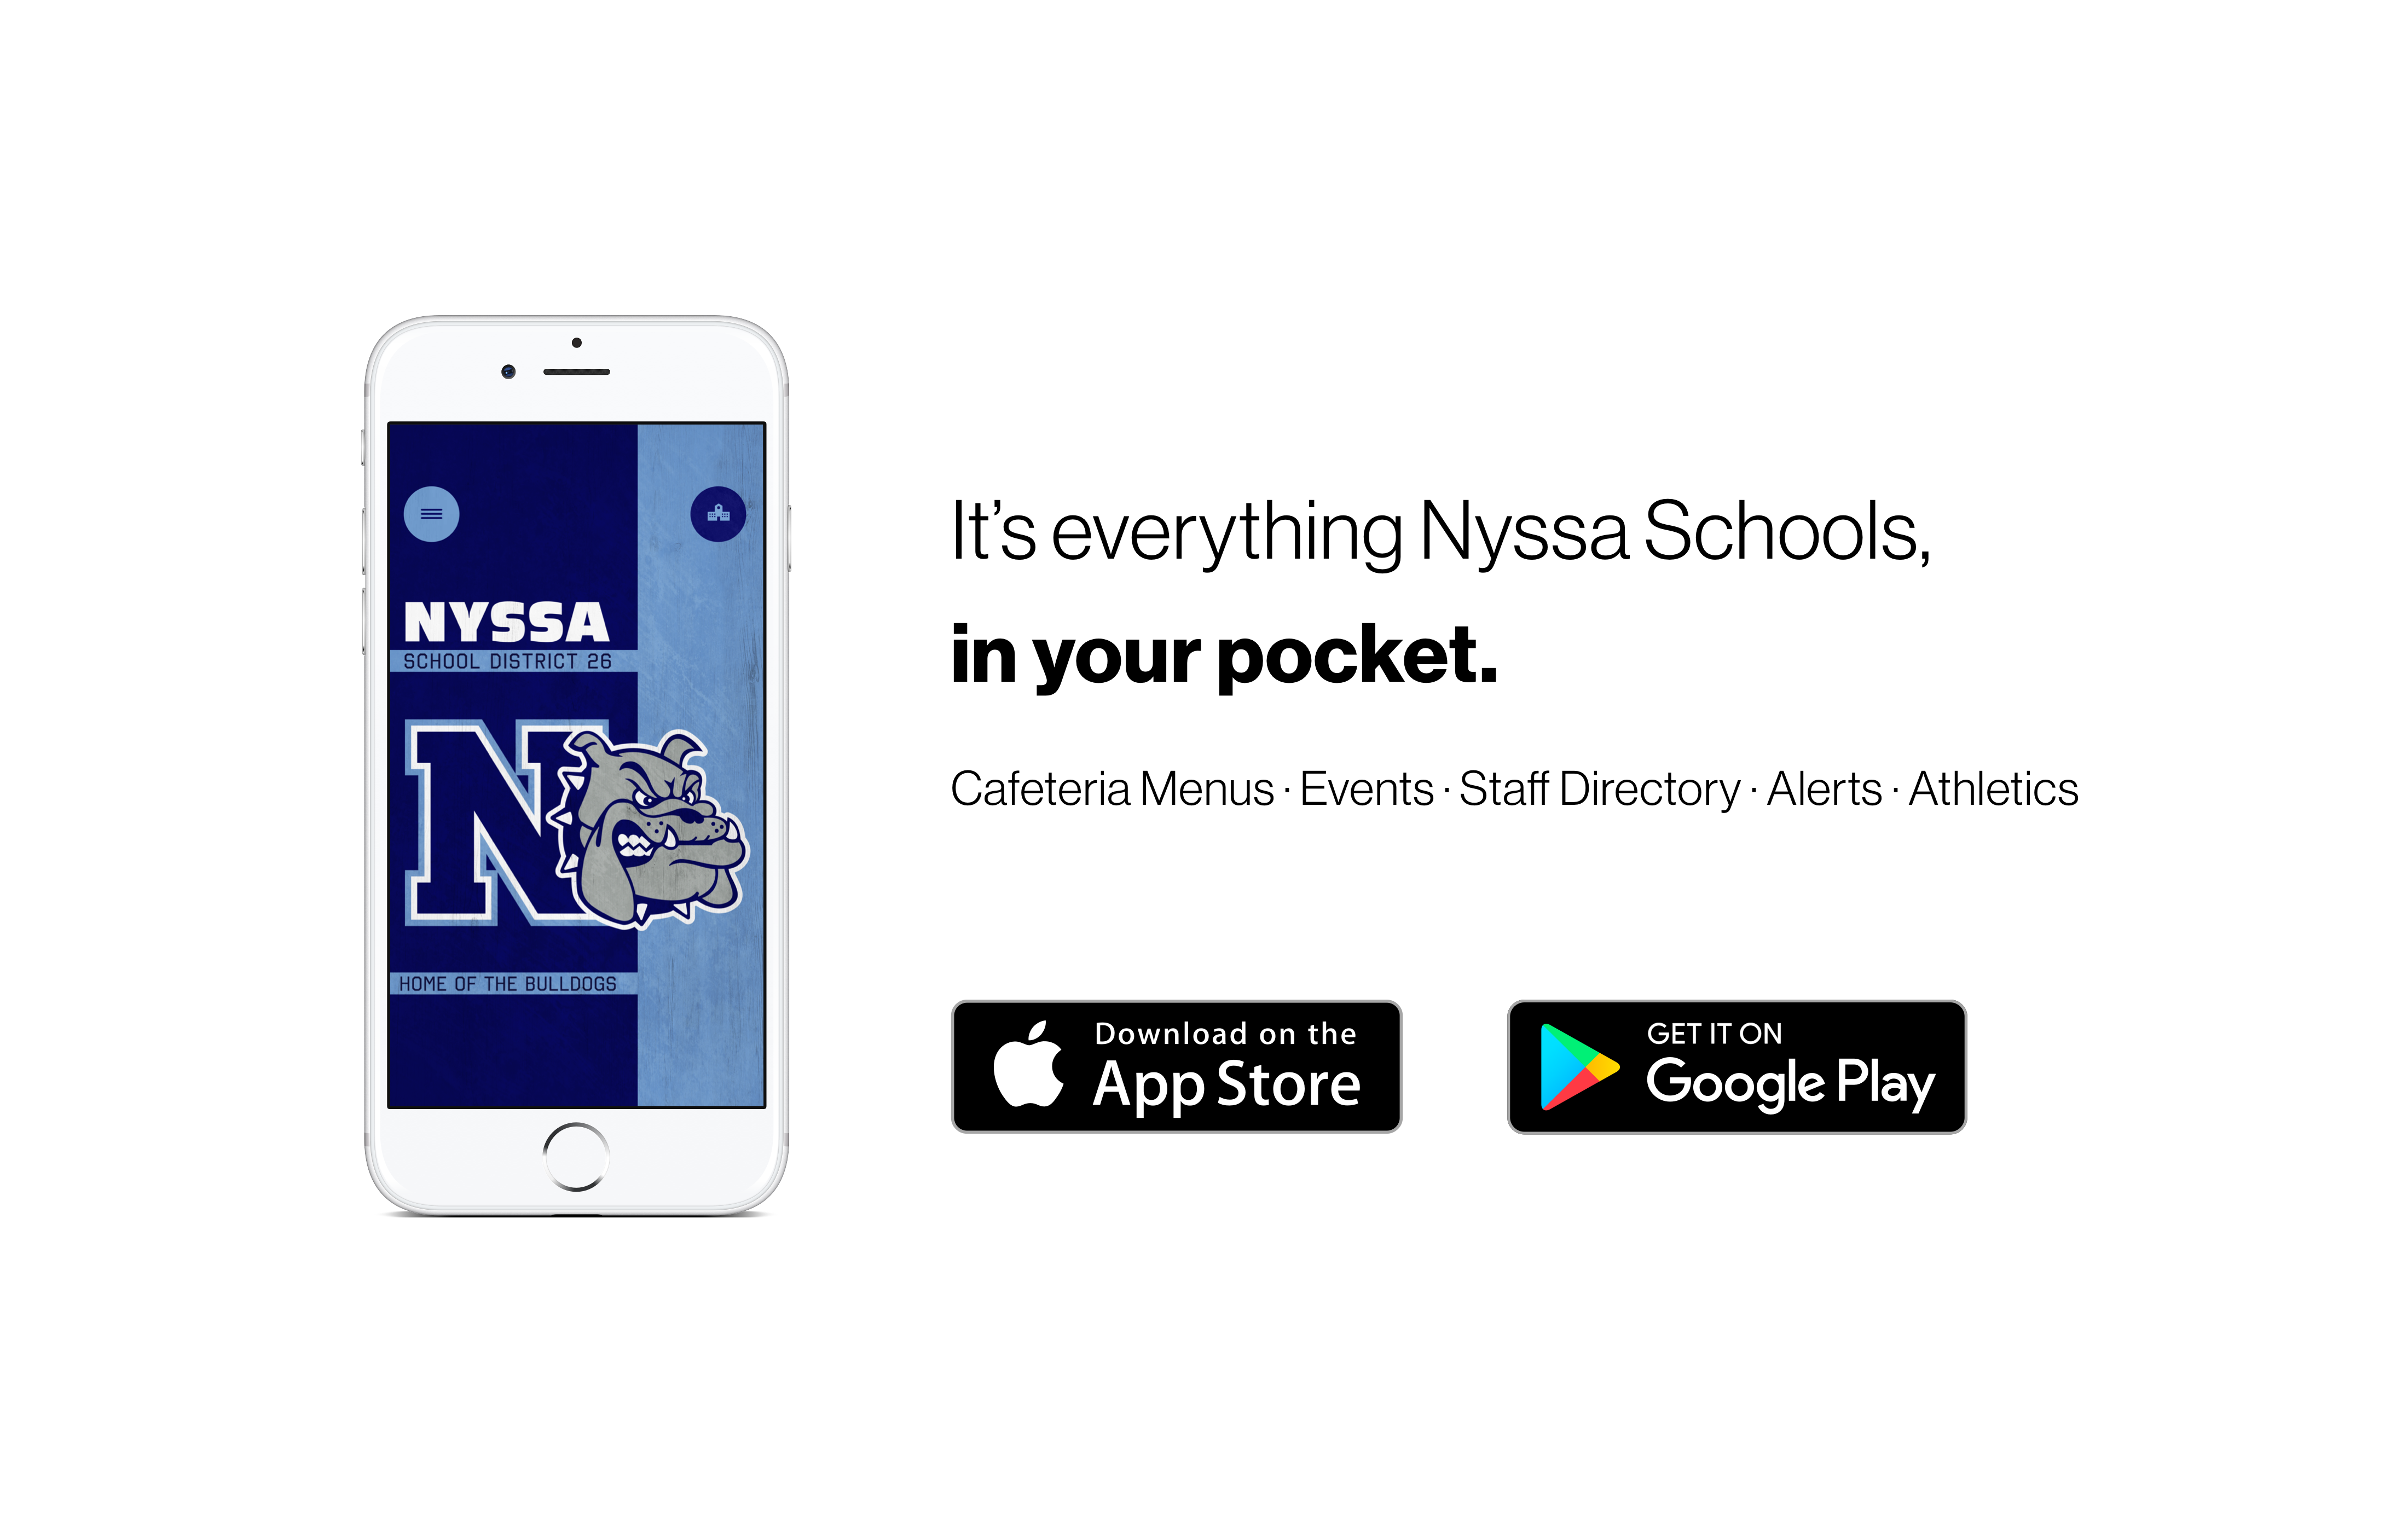 It's everything Nyssa Schools, in your pocket